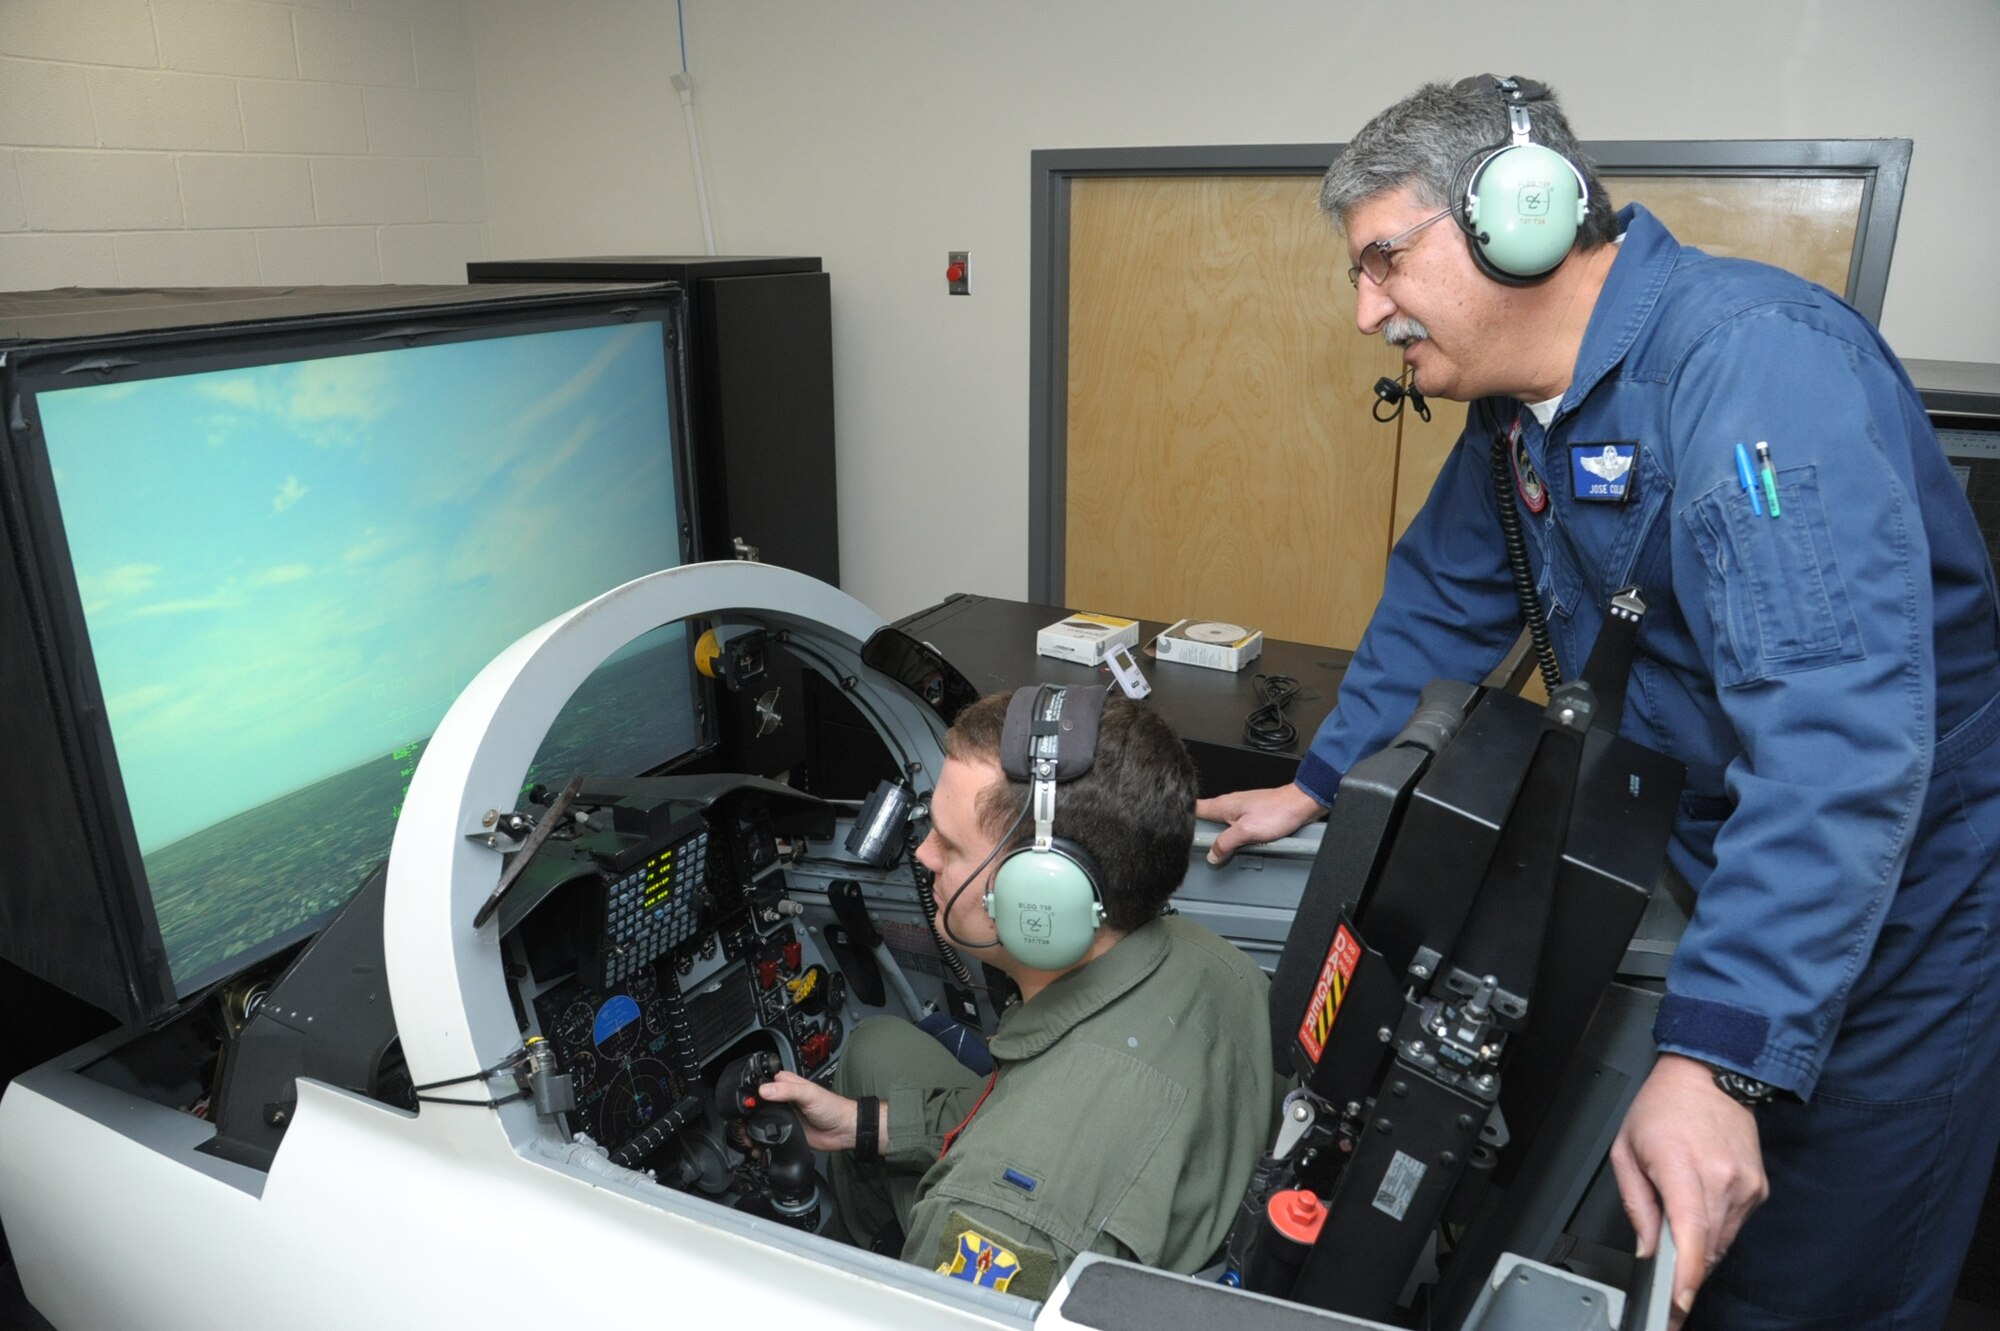 First Lt. Austin Hornsby,435th Flying Training Squadron student pilot trains on a simulator, while Jose Colon, instructor looks on, at Joint Base San Antonio-Randolph, Oct. 20, 2016. 	The simulator accomplishes less complex missions, such as instrument and emergency procedures training, due to the limited visual representation compared with the simulators known as the operational flight trainer and the weapon systems trainer.